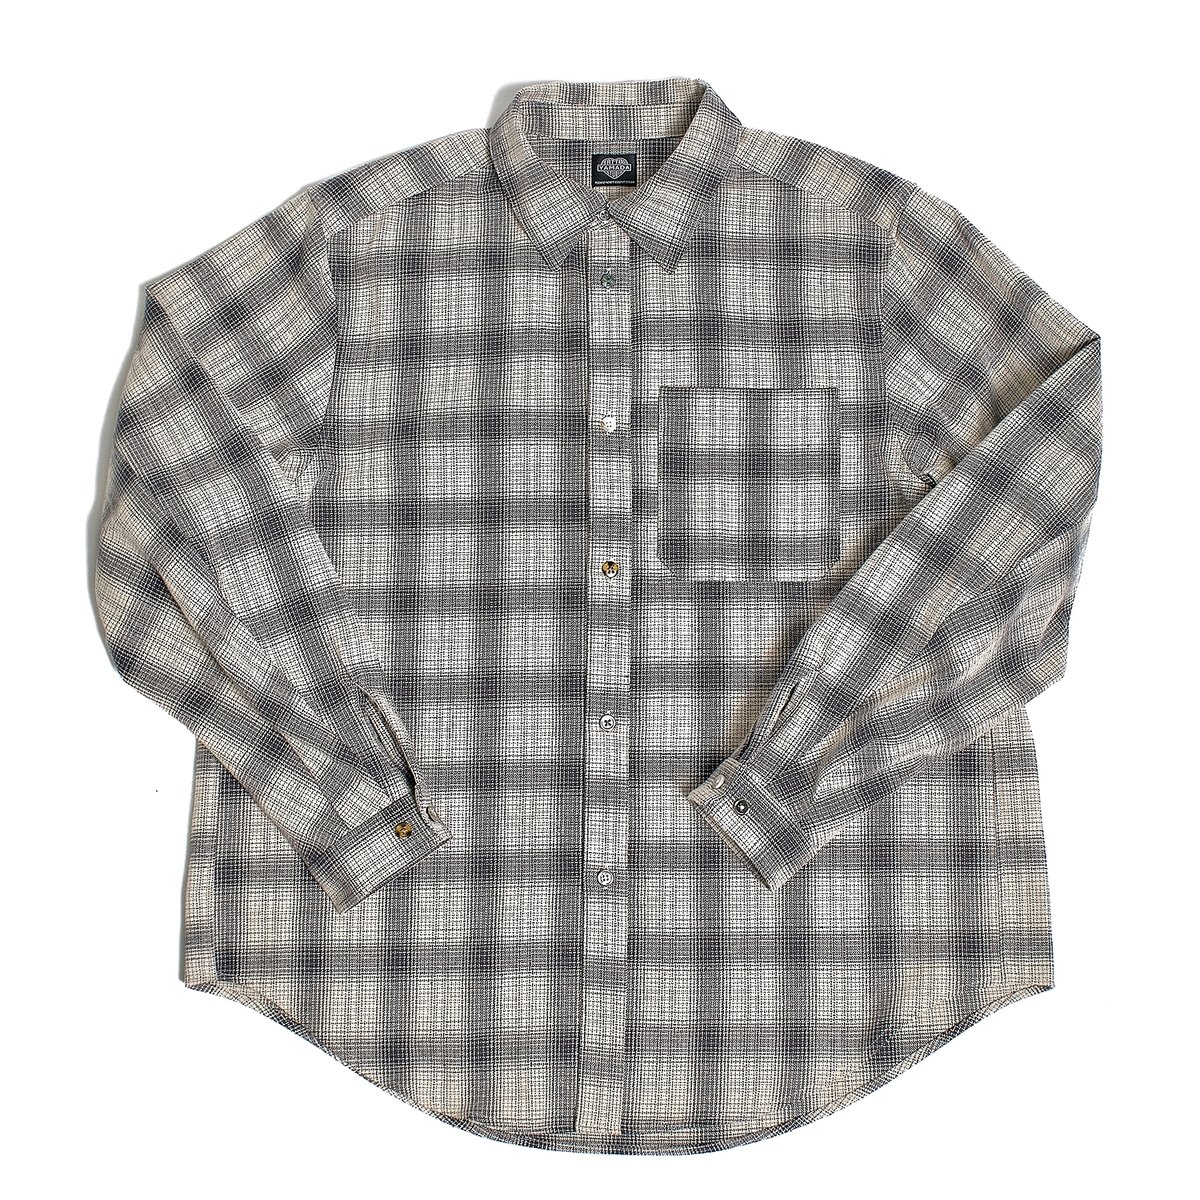 TSY ORIGINAL OMBRE CHECK SHIRTS IVORY後ほど対応します